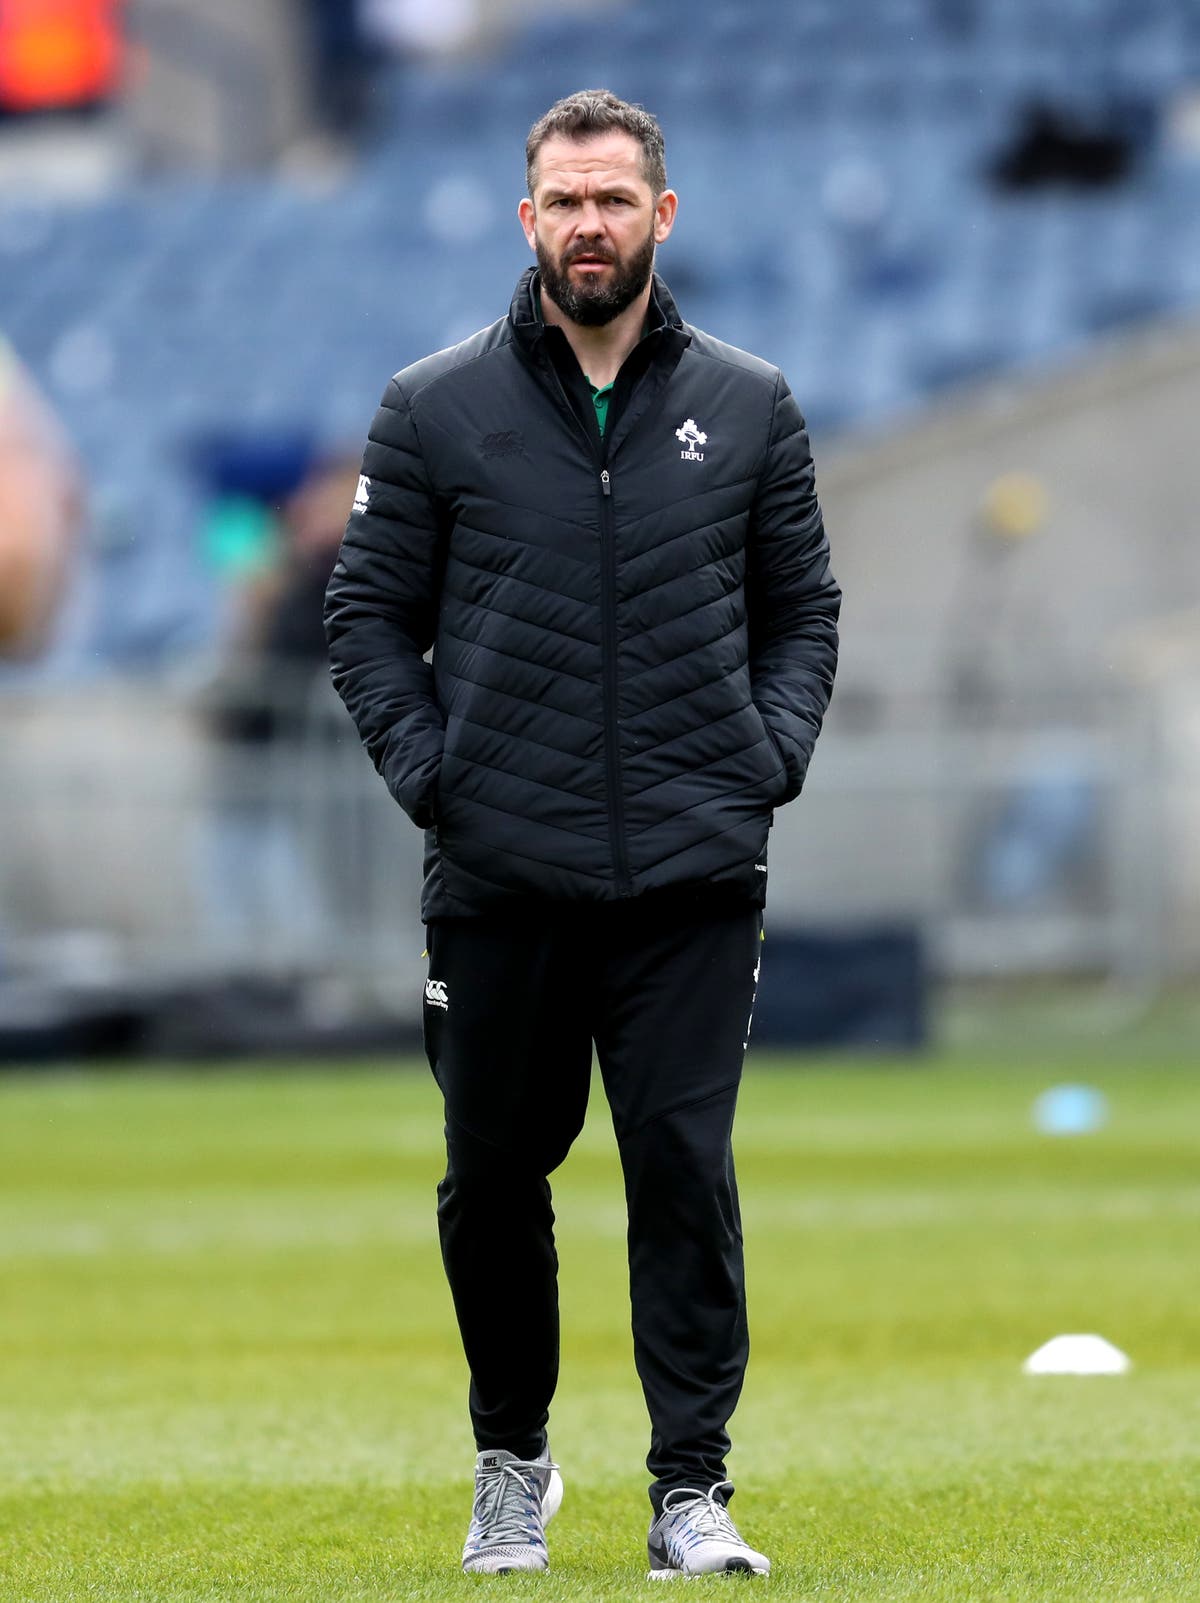 Andy Farrell hoping to unearth talent as Ireland end summer series against USA